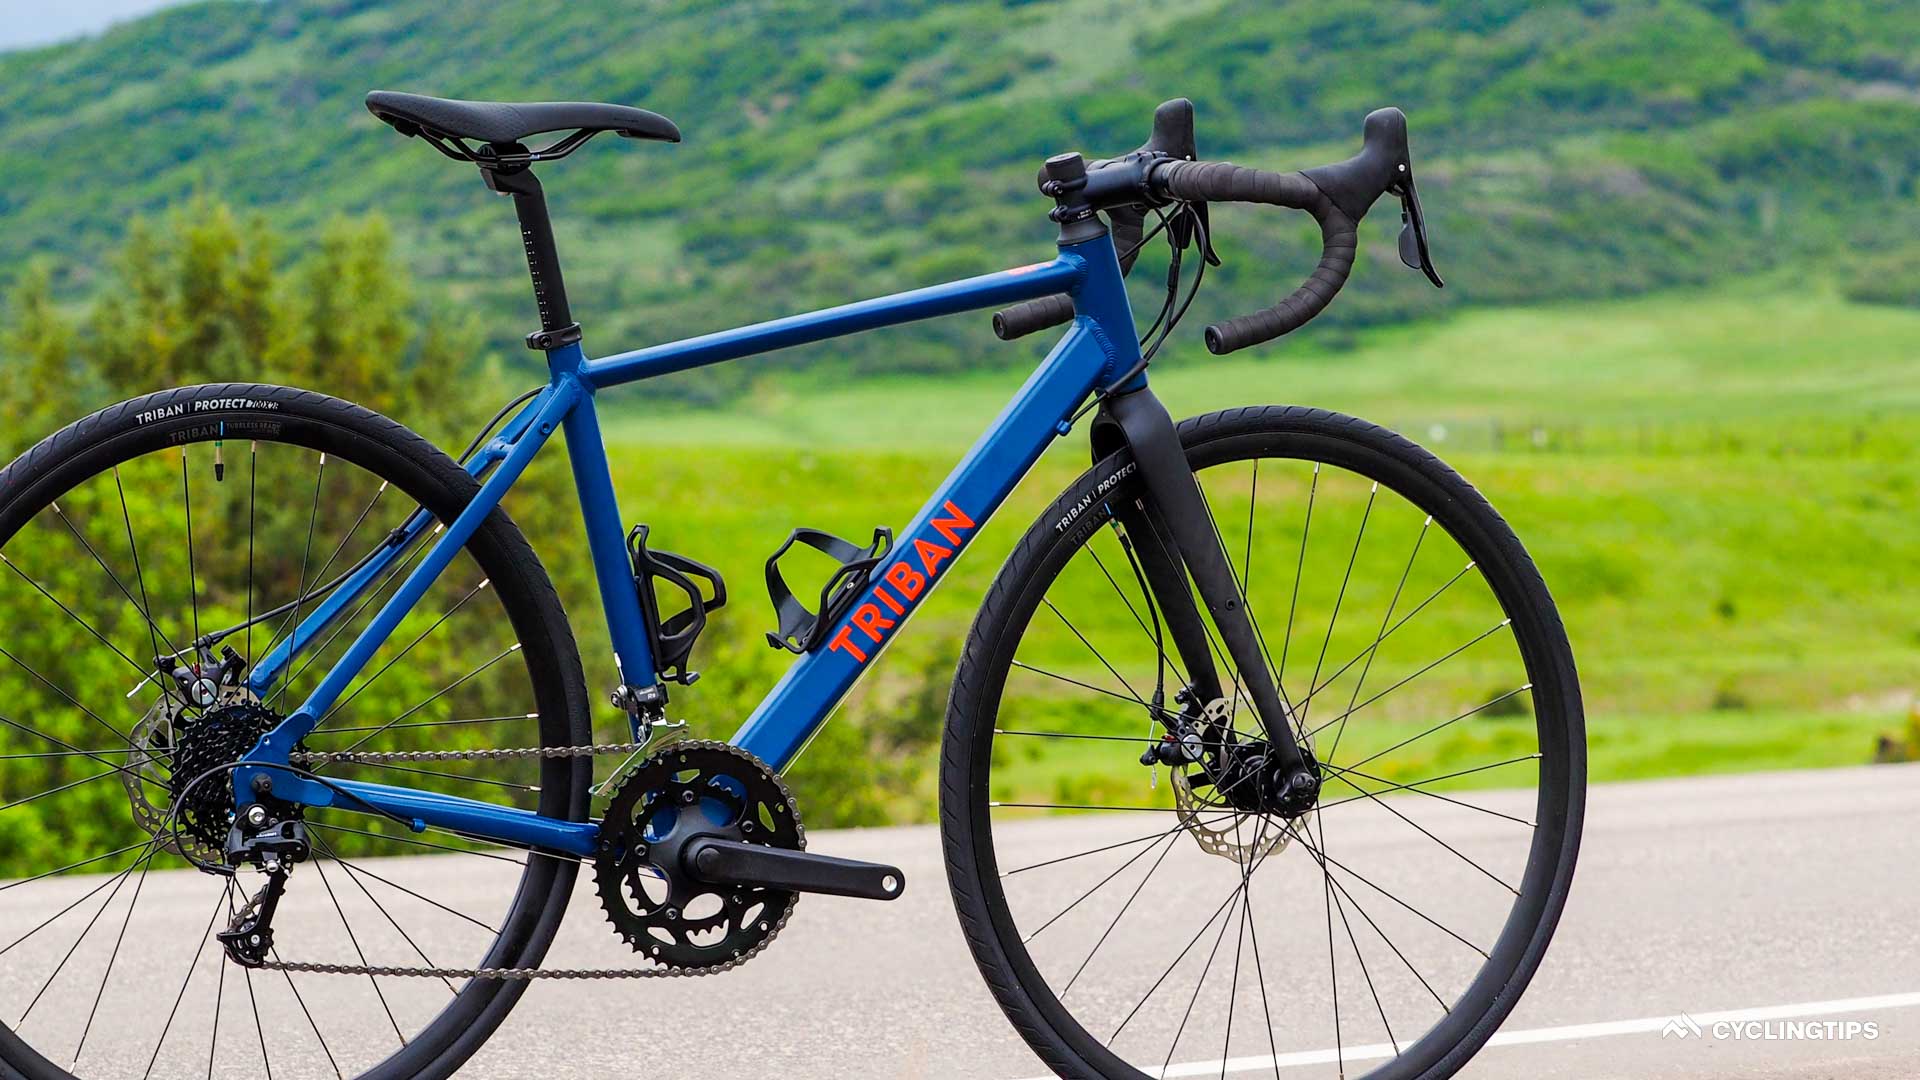 2022 Decathlon Triban RC120 review Tiny price, but with a big impact